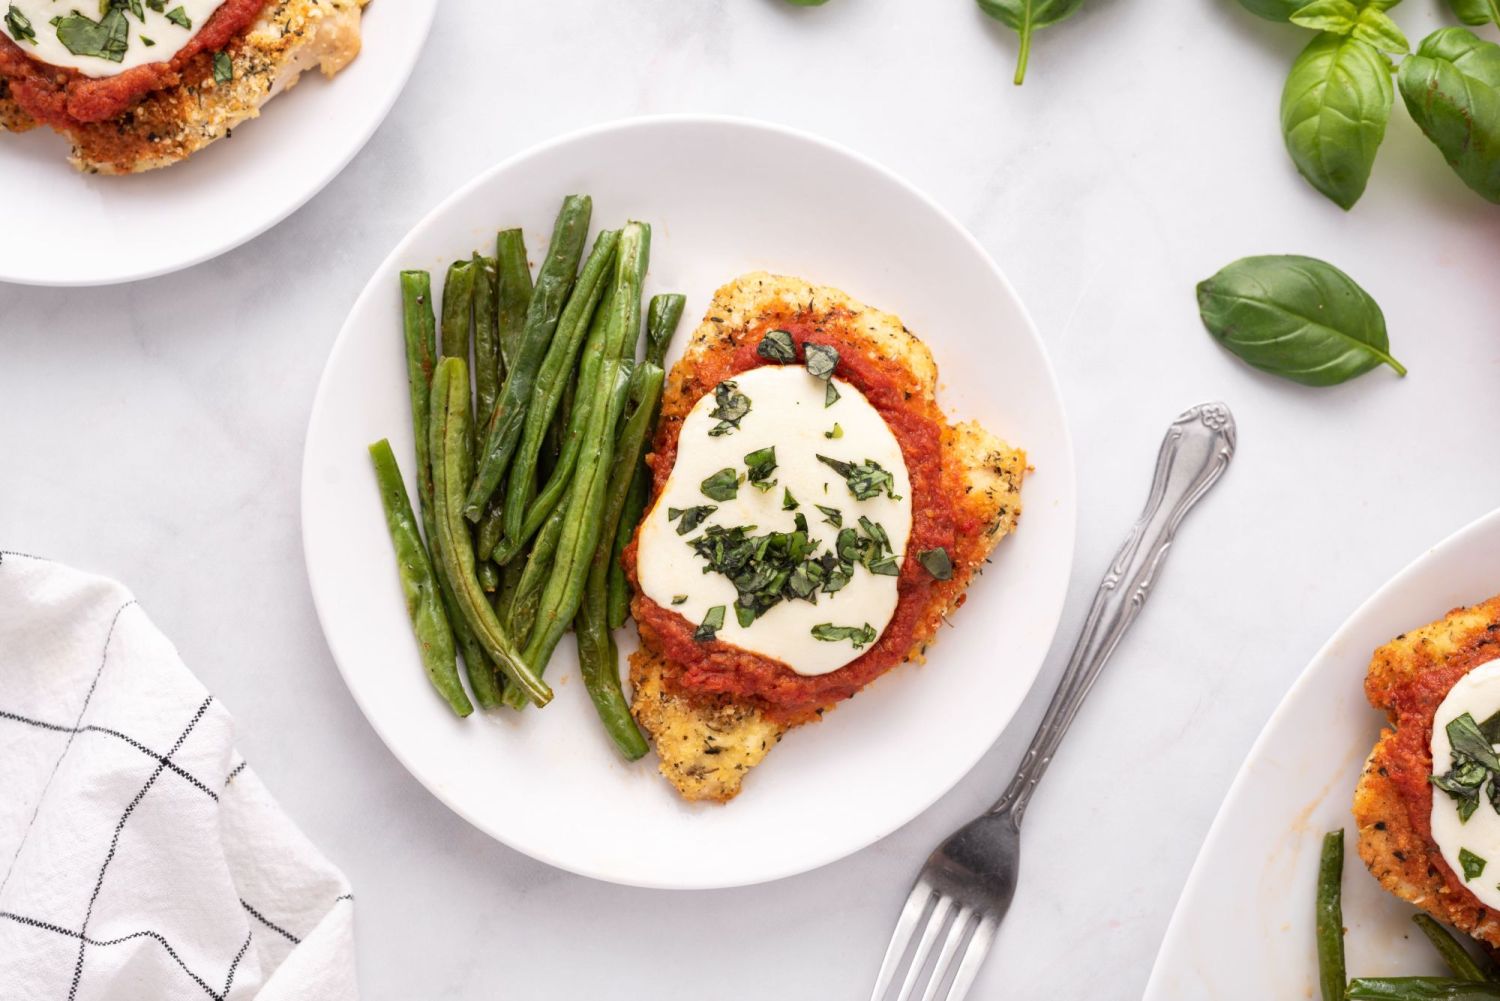 Healthy chicken parmesan with crispy baked chicken coated in marinara sauce and melted cheese on a plate with green beans.